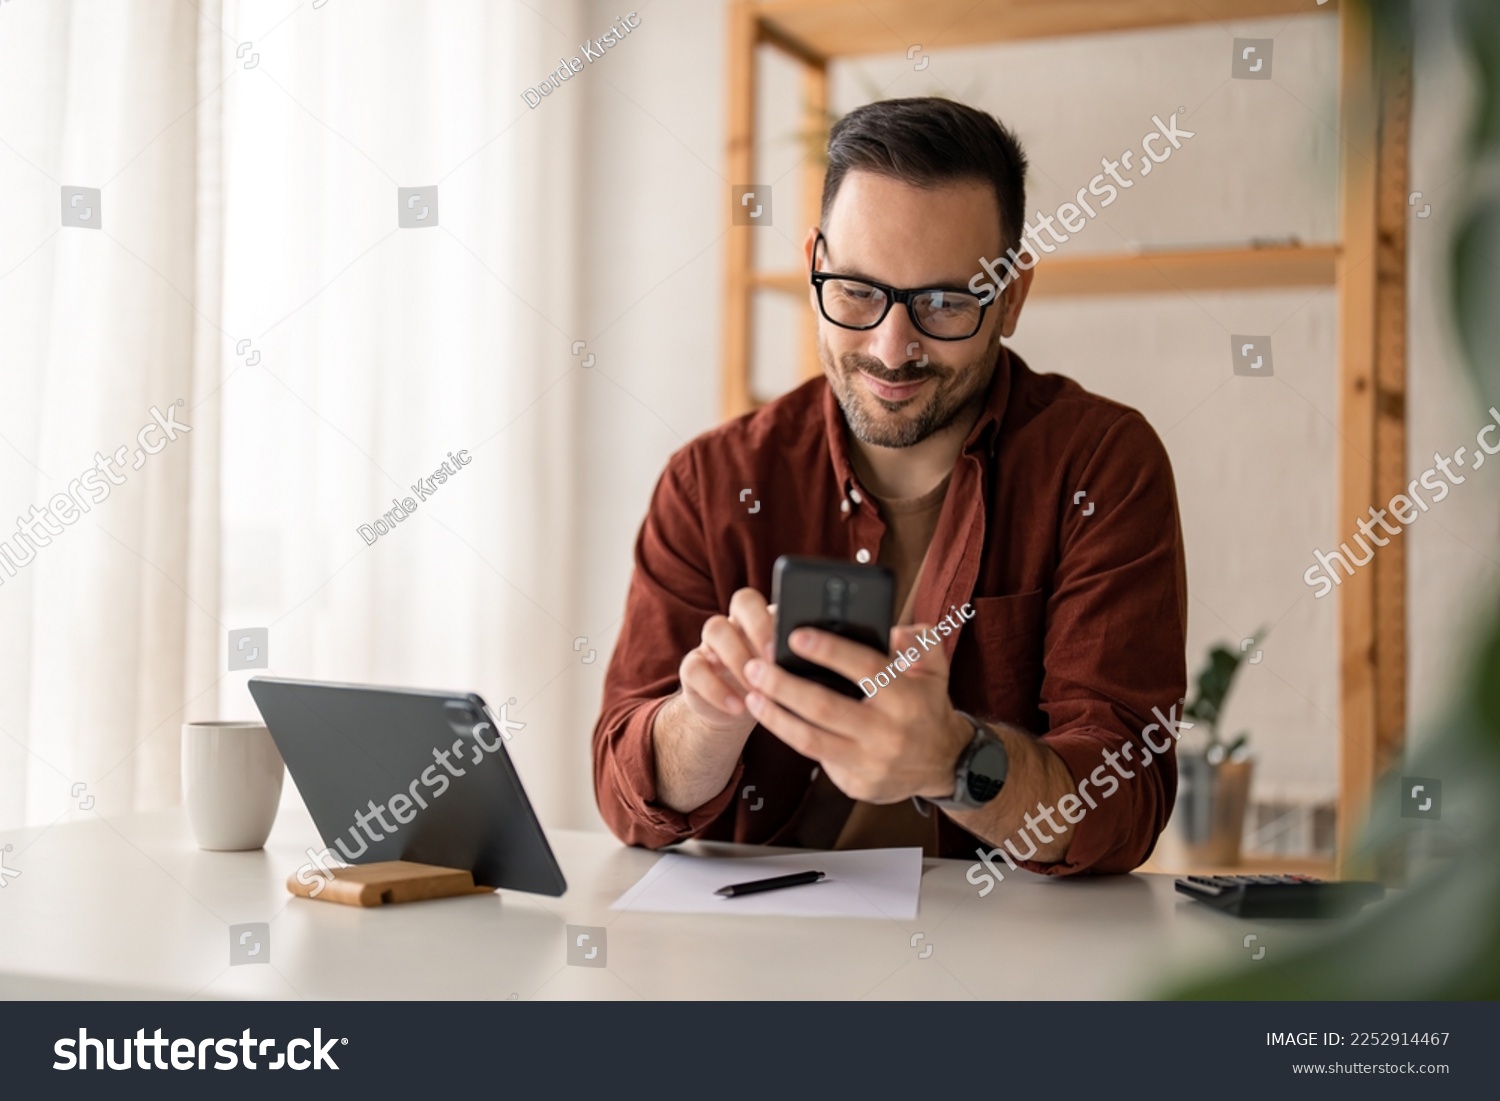 Happy smiling businessman wearing casual clothes and using modern smartphone in his home office during the day, typing, touching the screen, browsing the internet or writing text messages. #2252914467